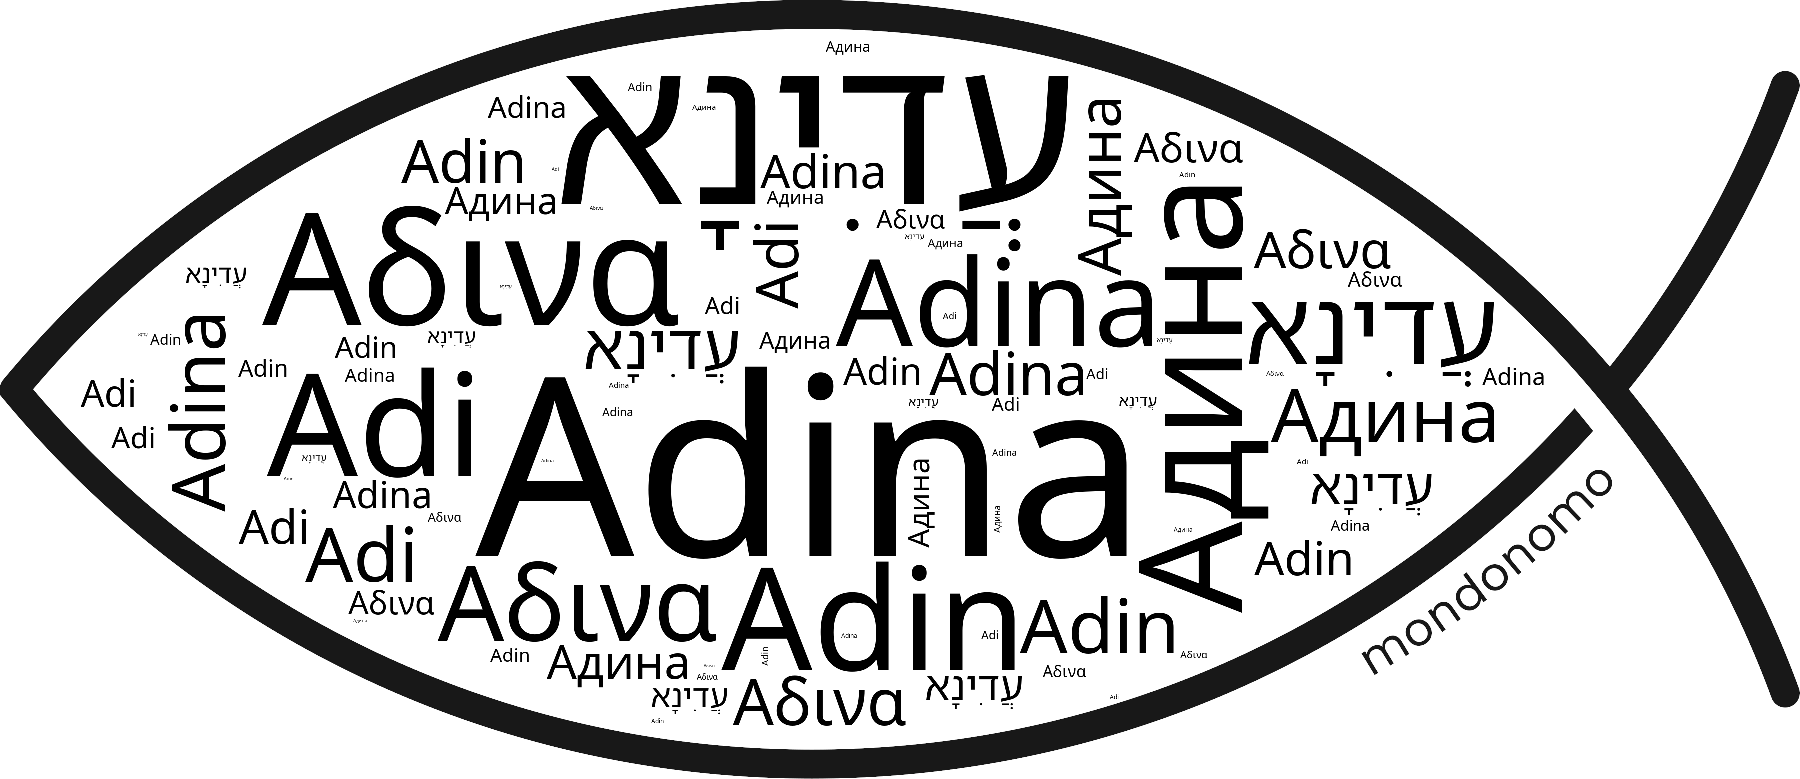 Name Adina in the world's Bibles